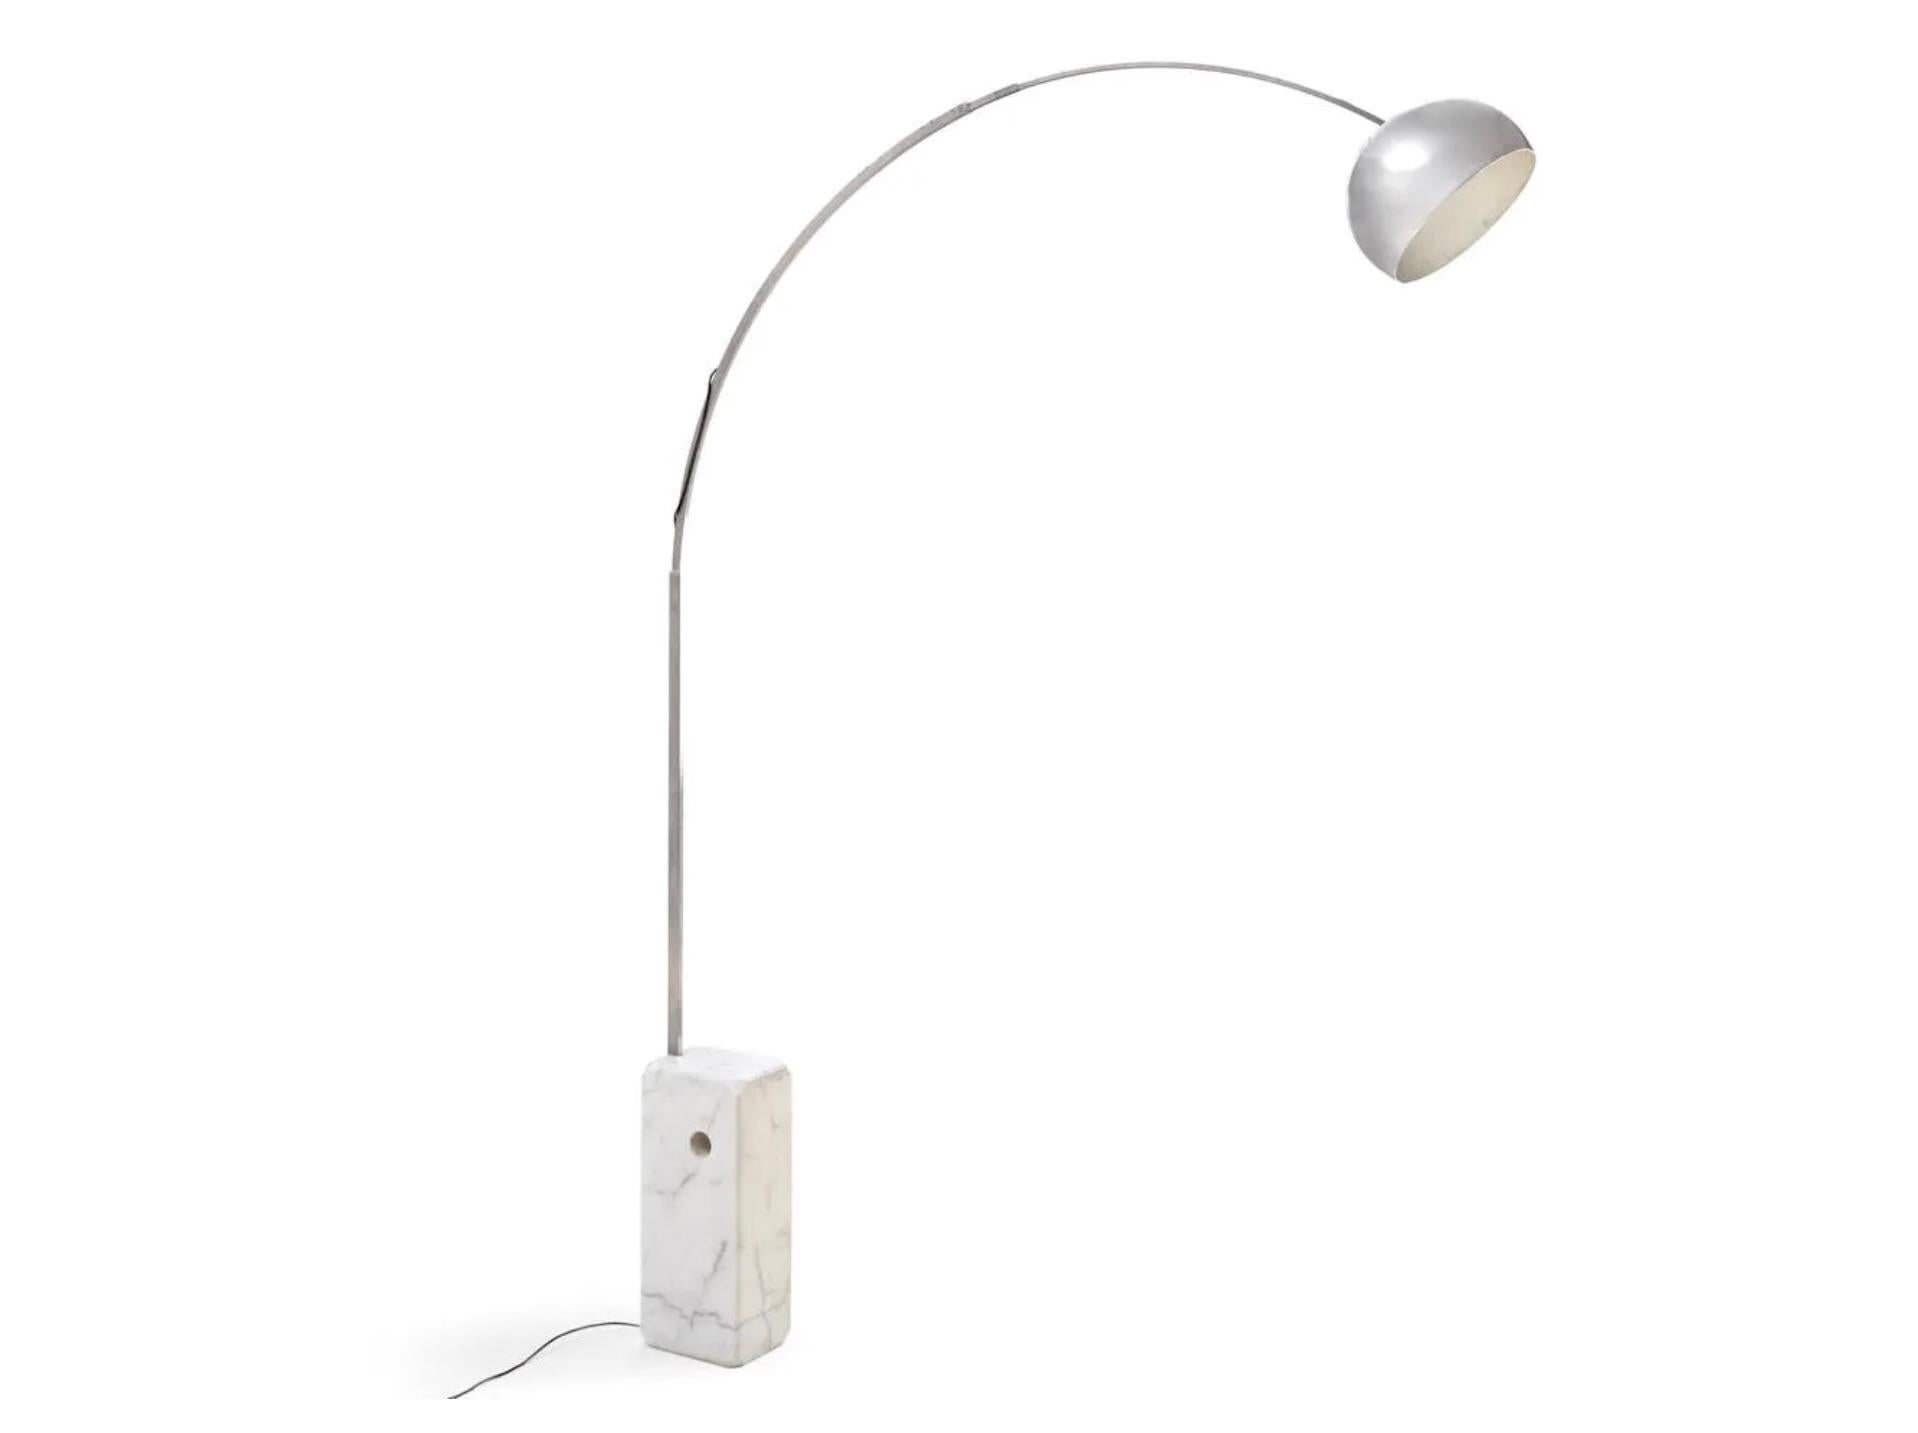 Achille Castiglioni Flos Arco Floor Lamp, Italy, Mid-20th c. In Good Condition For Sale In Los Angeles, CA